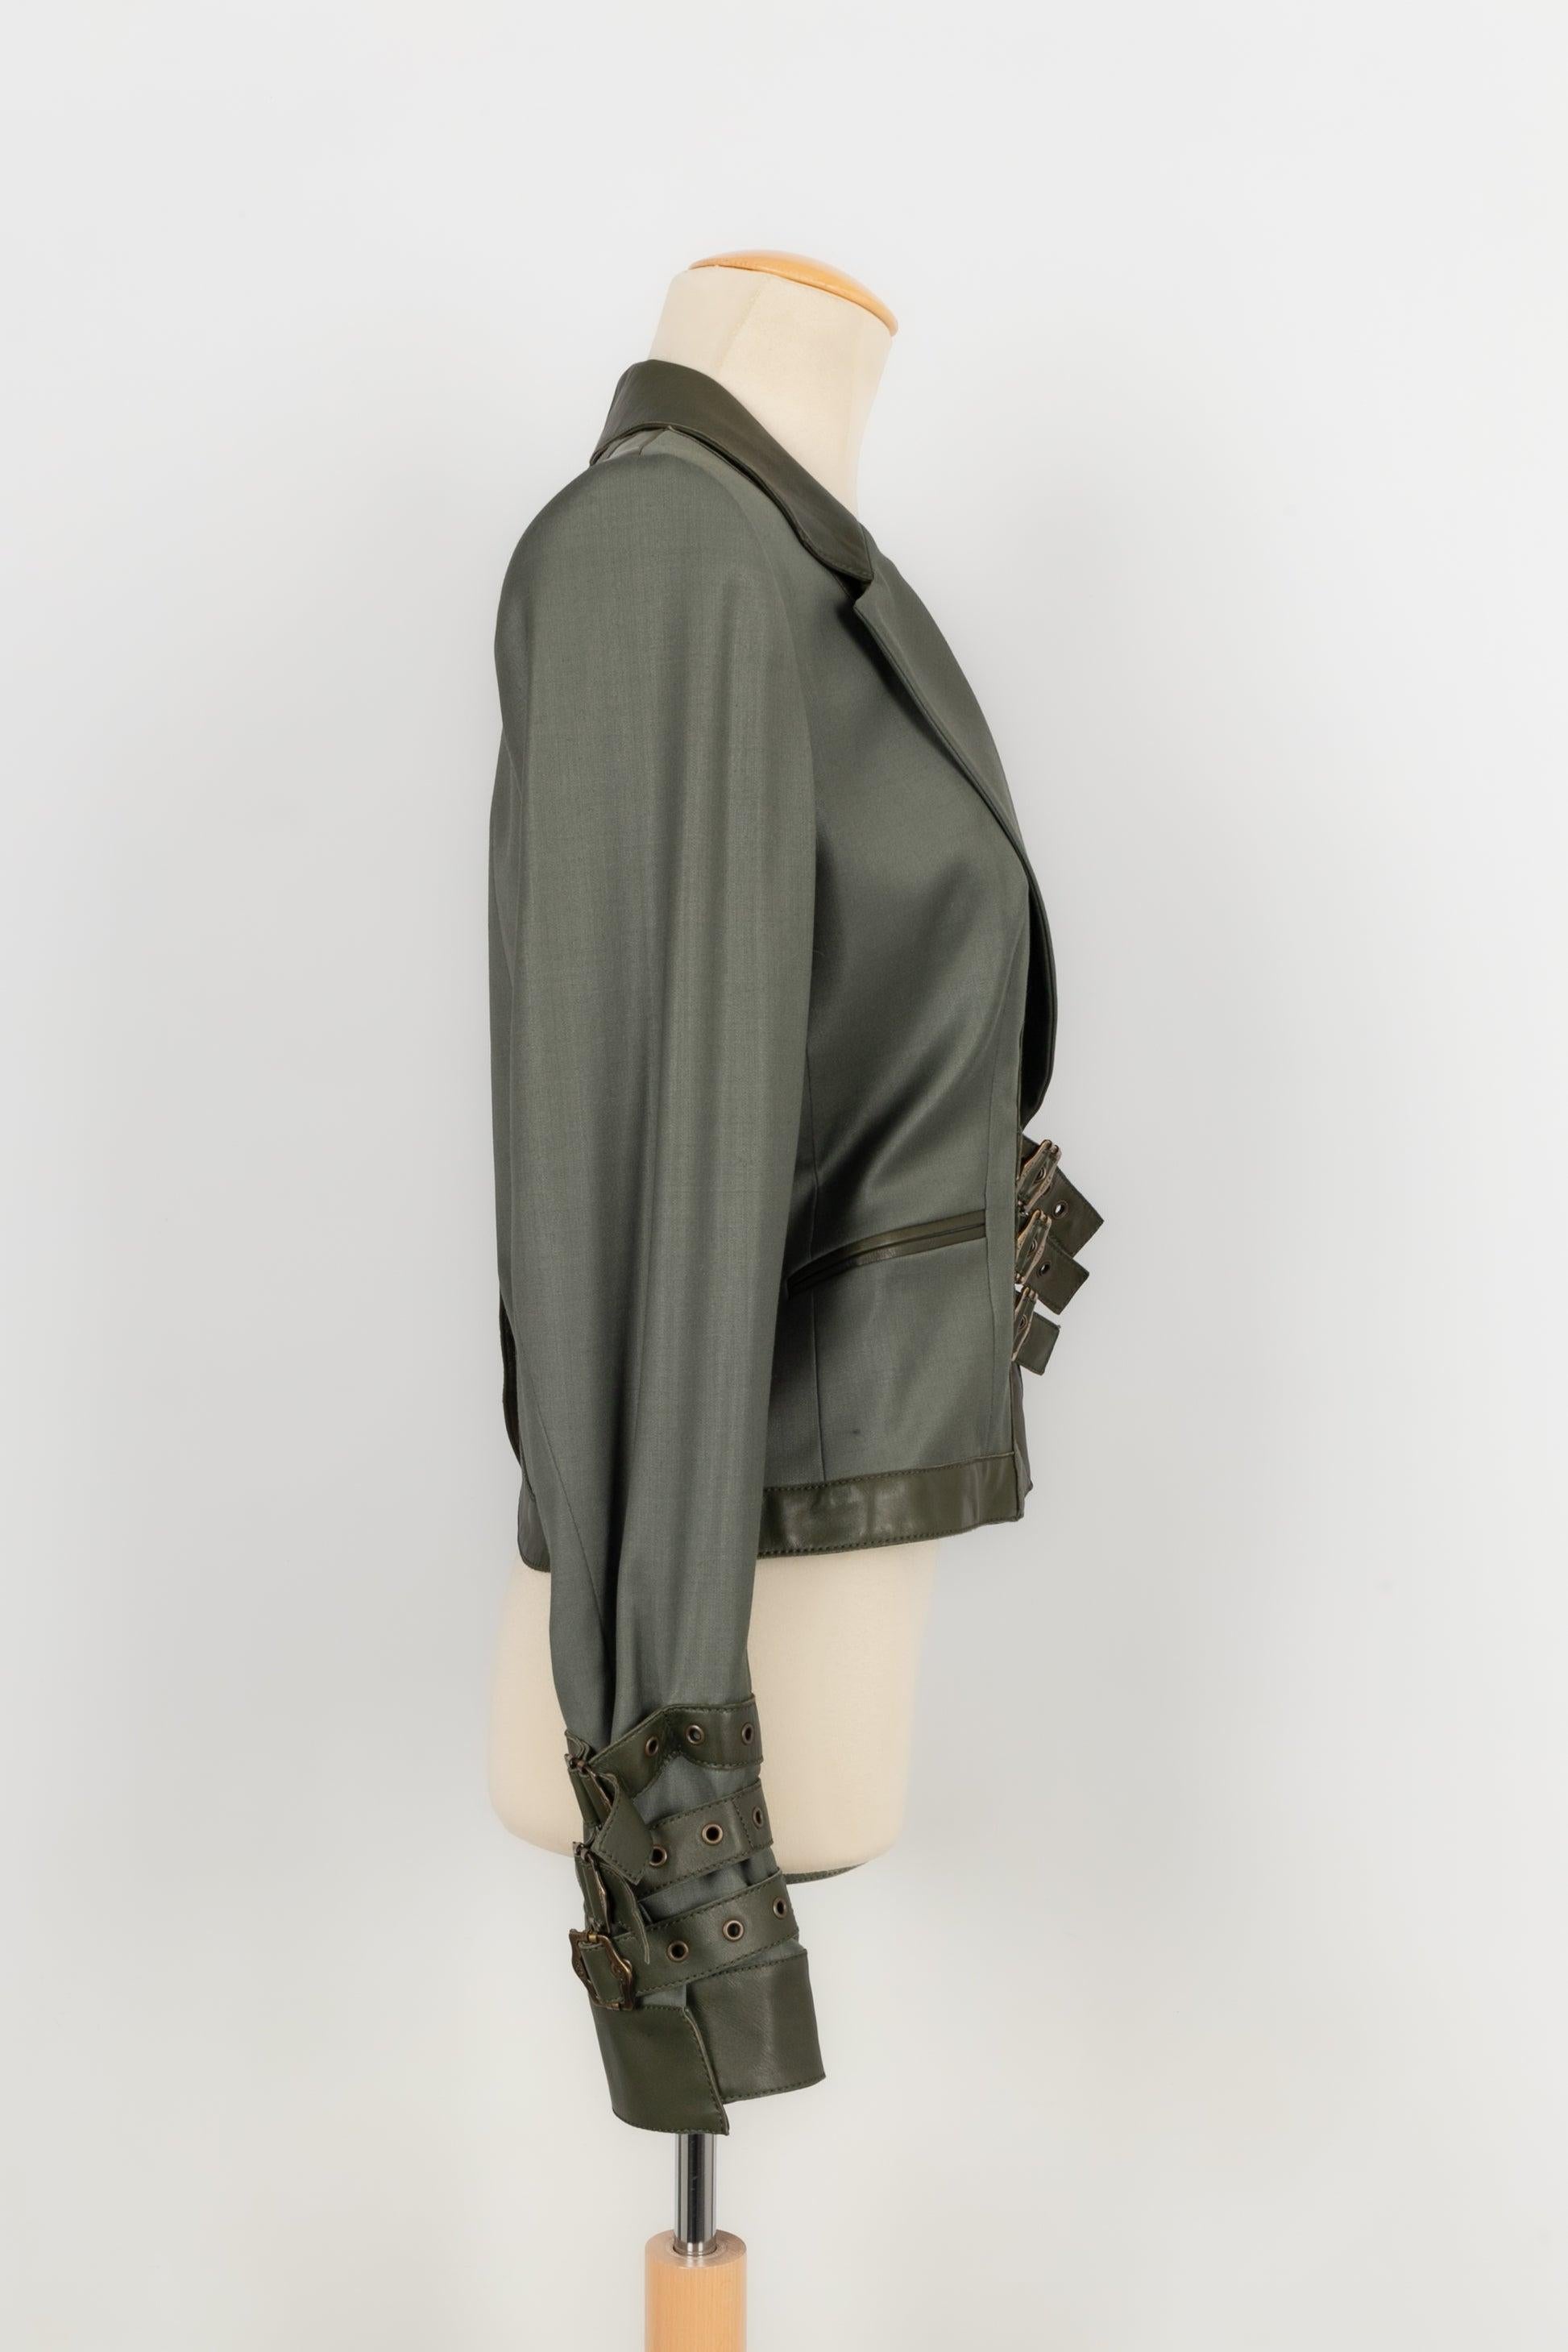 Dior Khaki Olive Green Leather and Wool Jacket Fall, 2003 In Excellent Condition For Sale In SAINT-OUEN-SUR-SEINE, FR